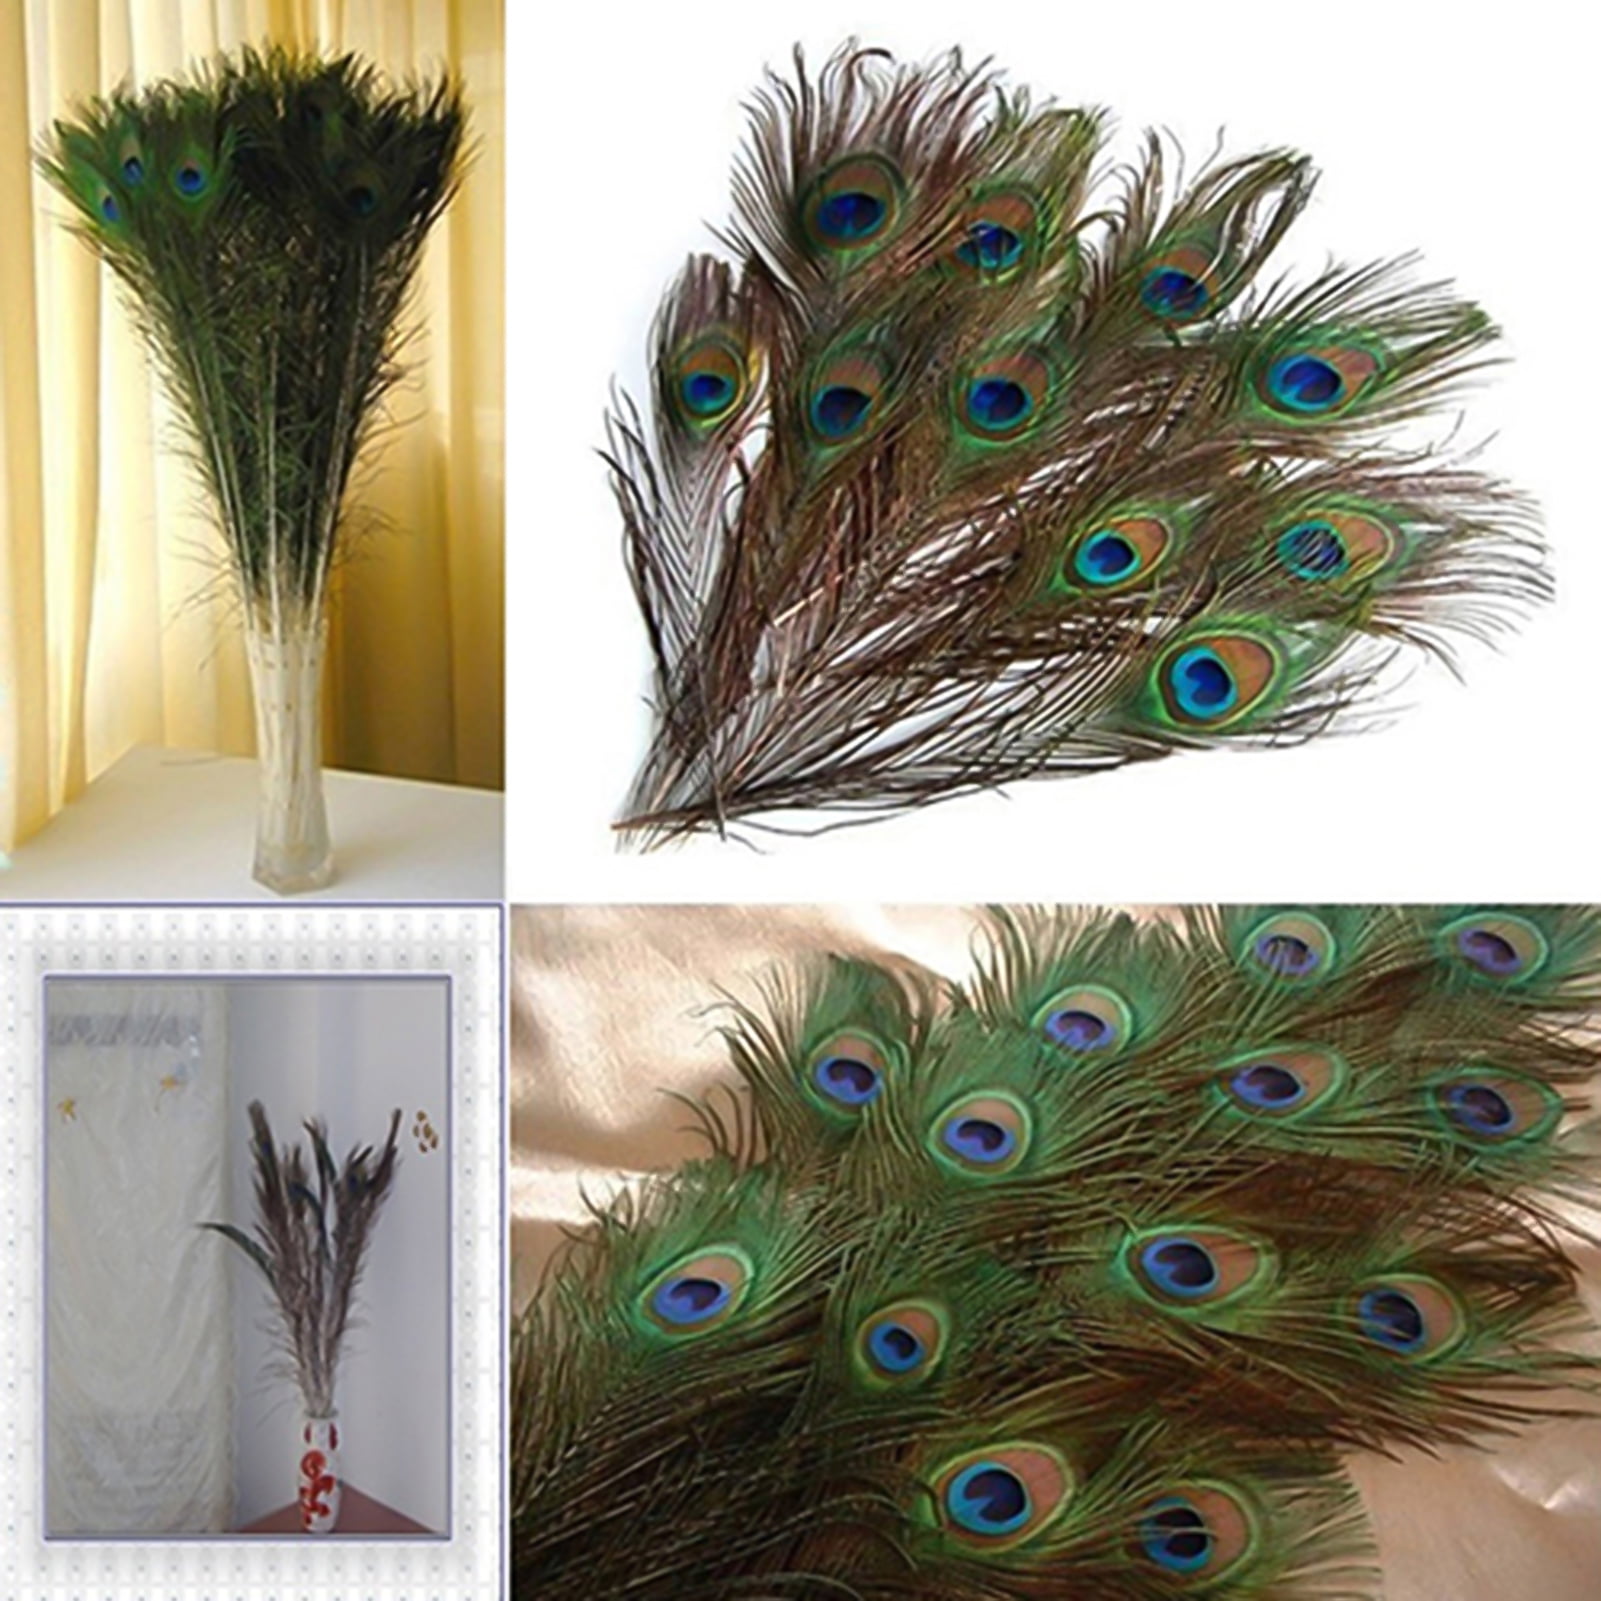 Creativity Street Non-Toxic Peacock Feathers, 35 to 40 Inches, Pack of 12